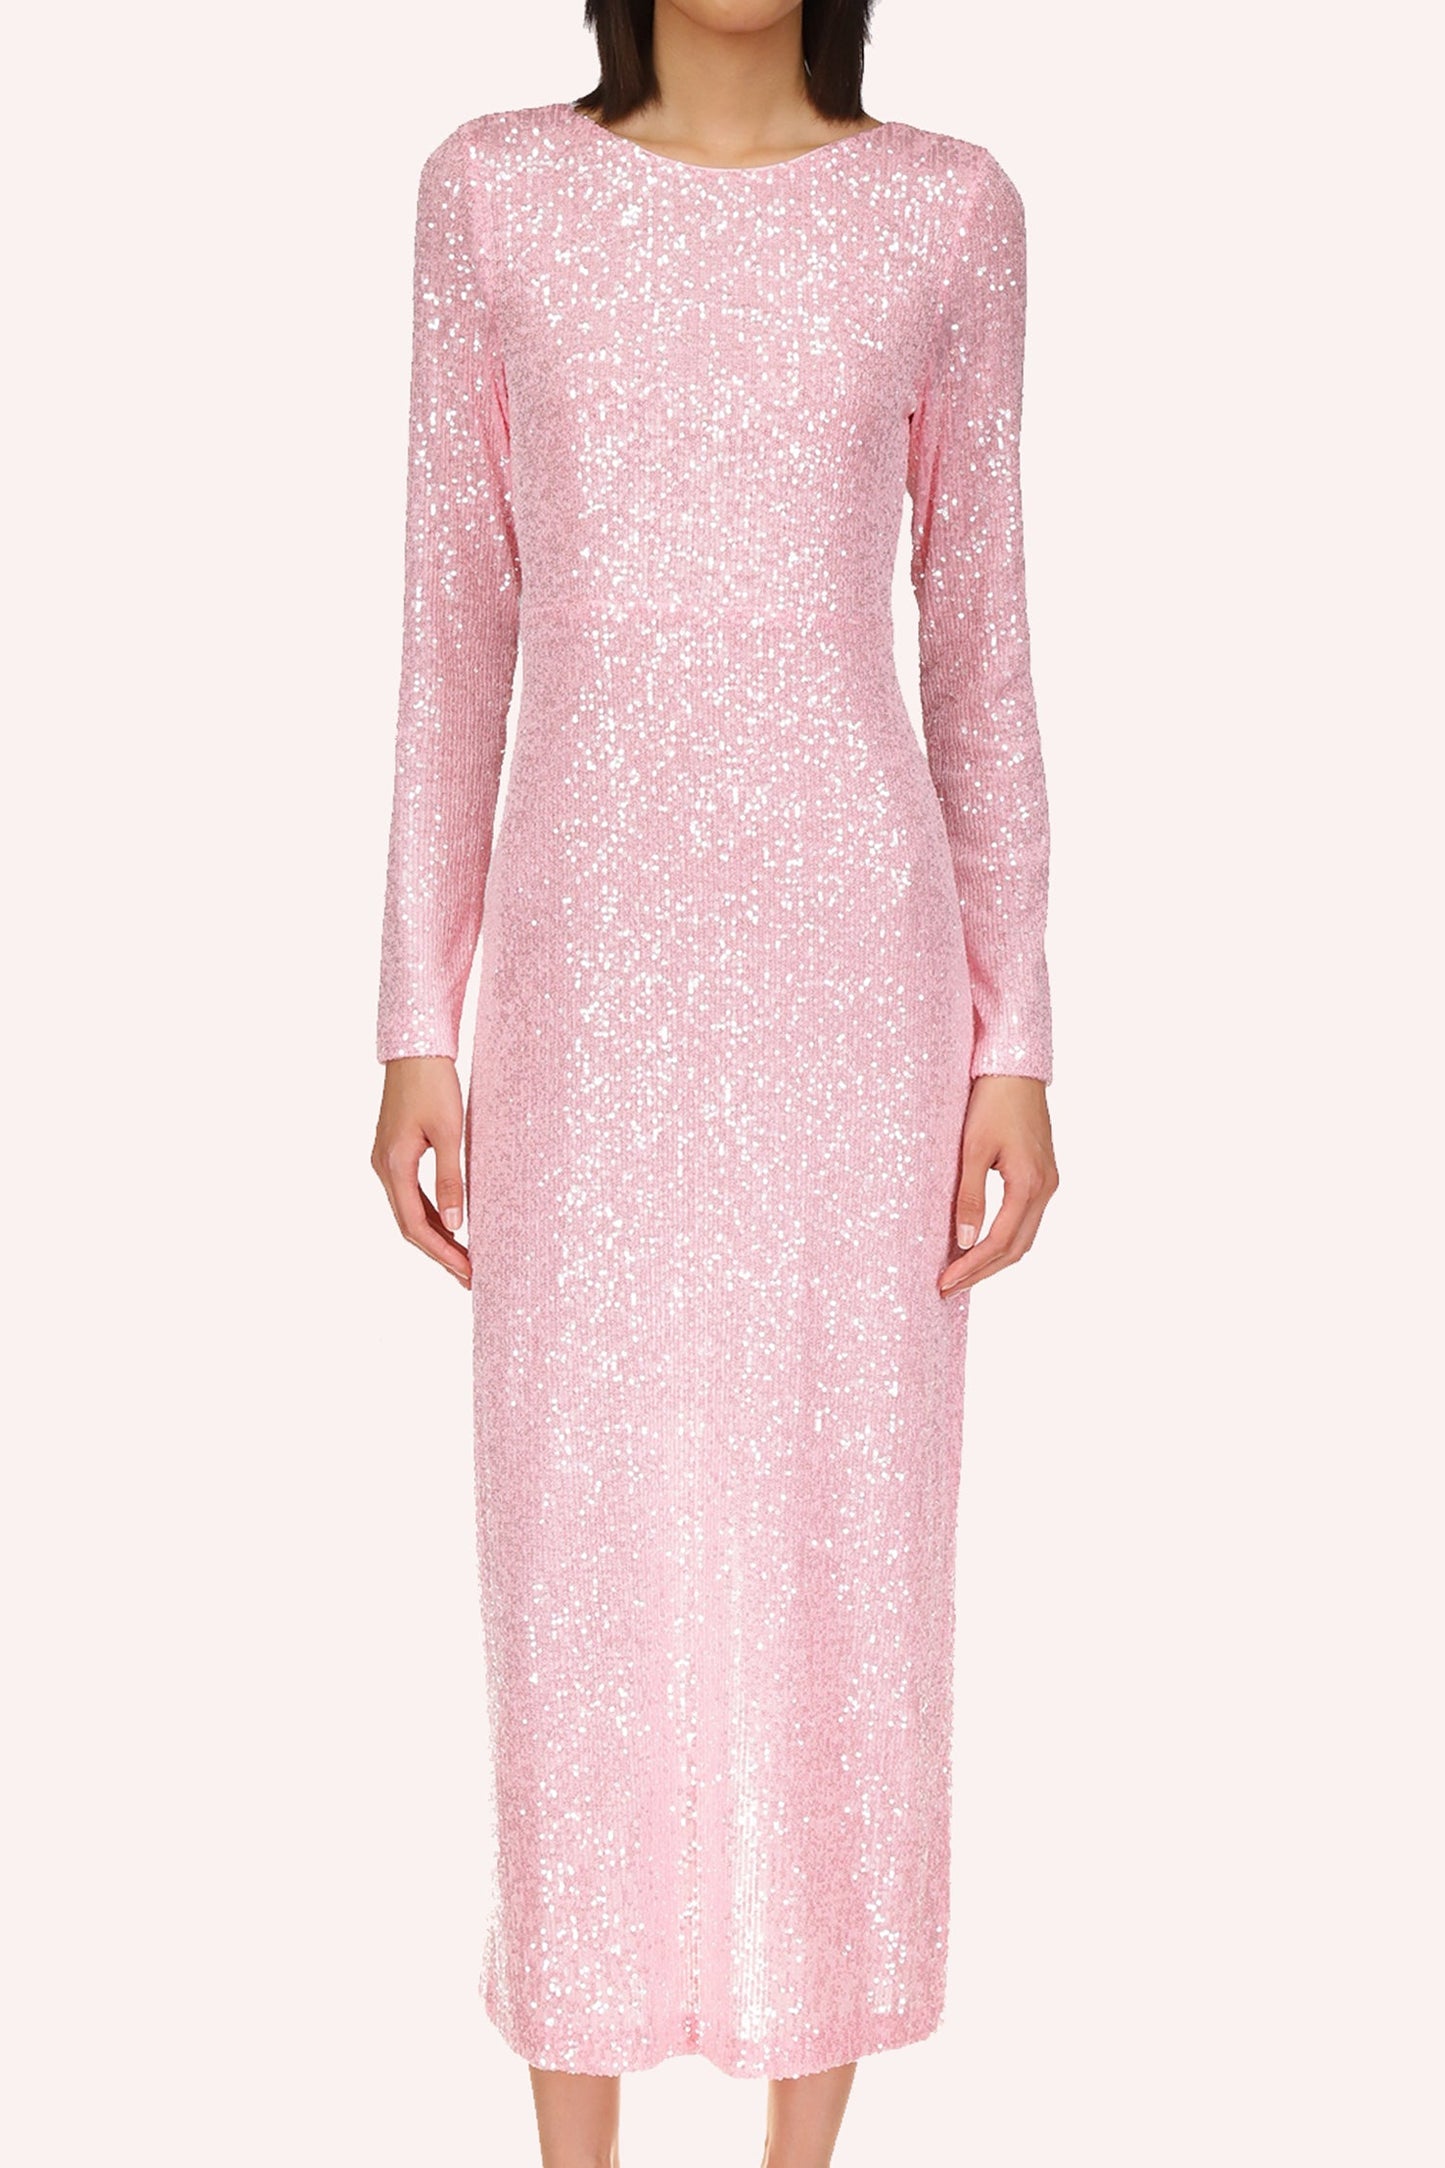 Sequin Mesh Dress Baby Pink by Anna Sui is a sophisticated gown in a soft baby pink color